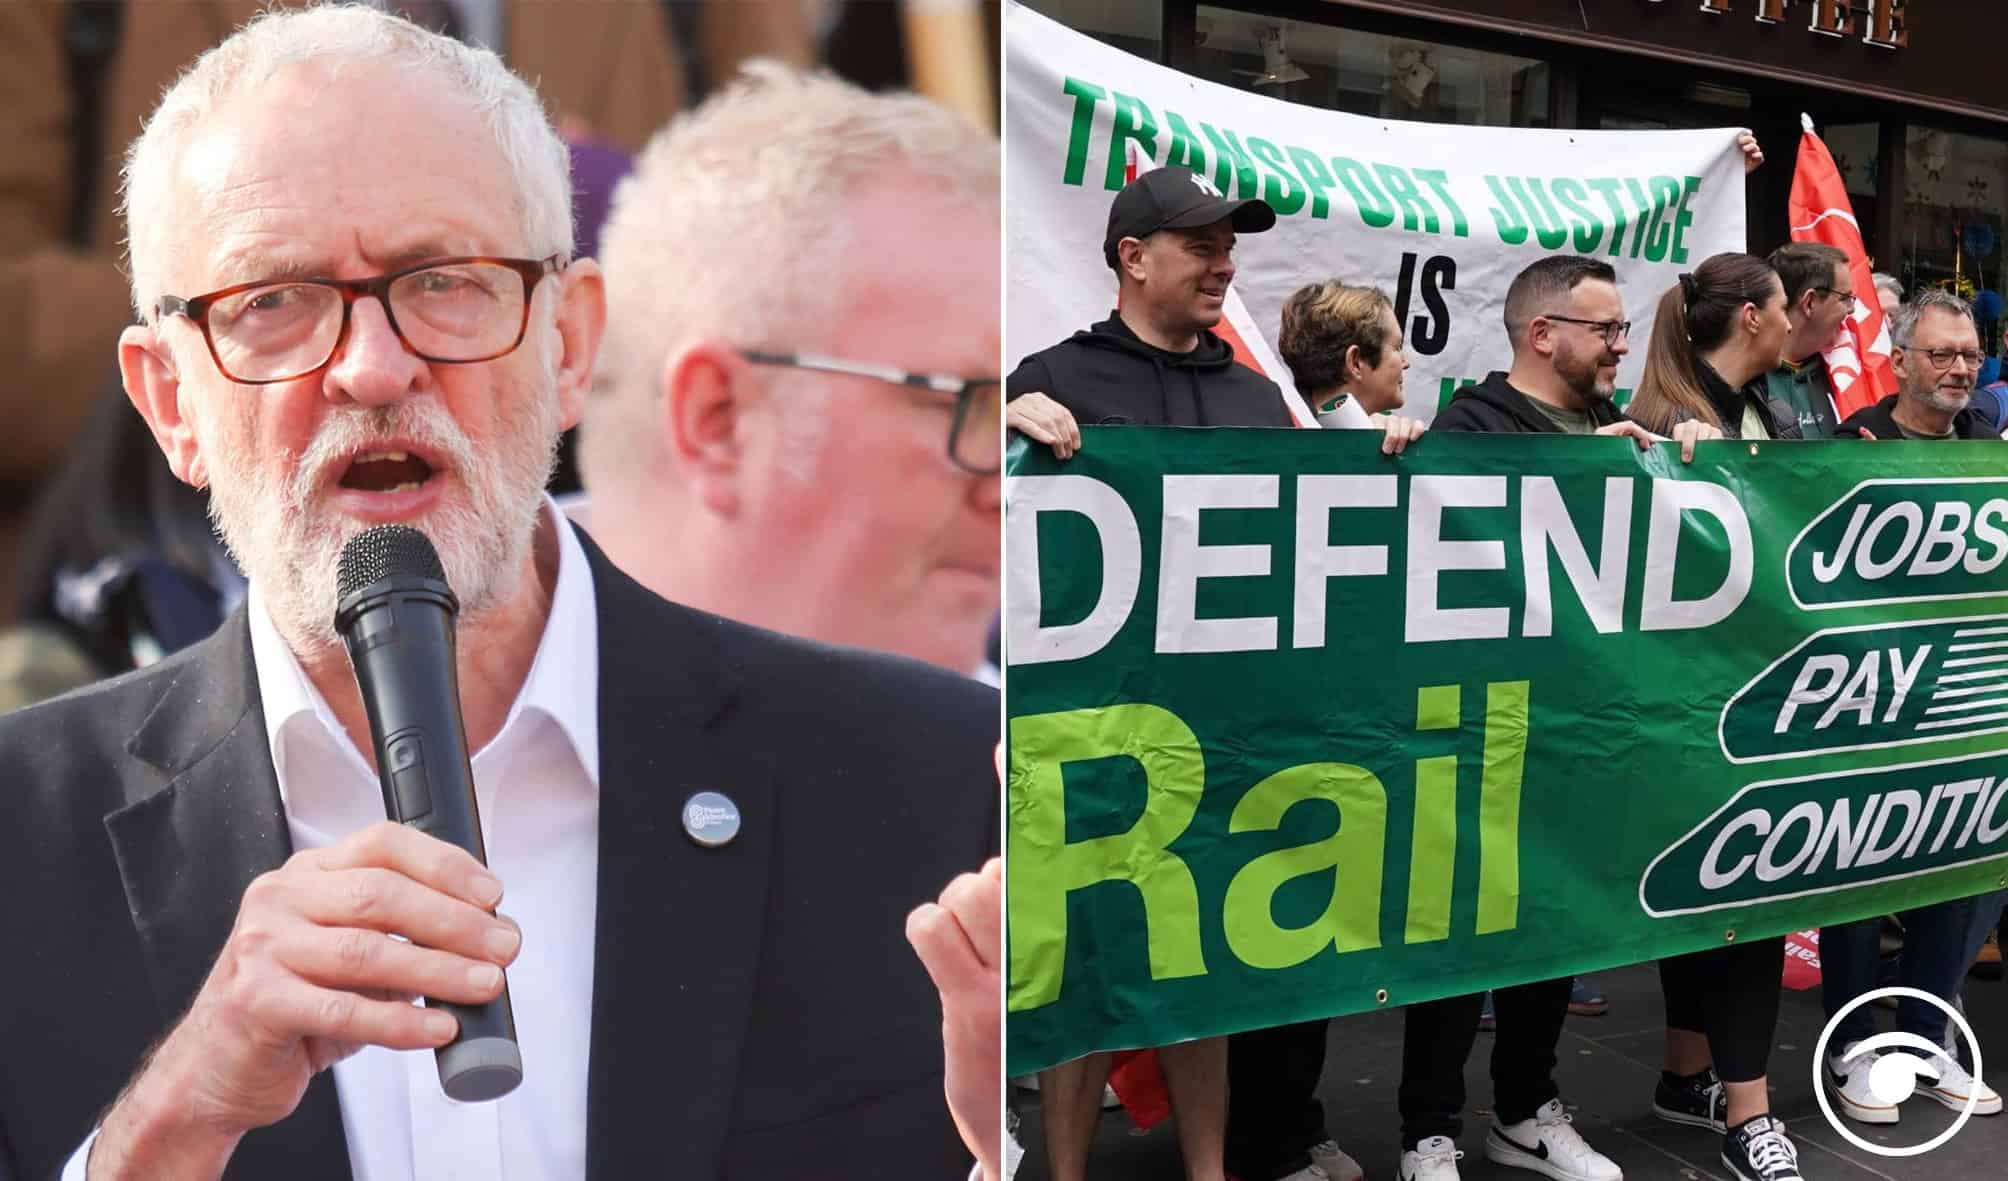 Watch: Spoof telephone caller blames Corbyn for rail strikes and everything else